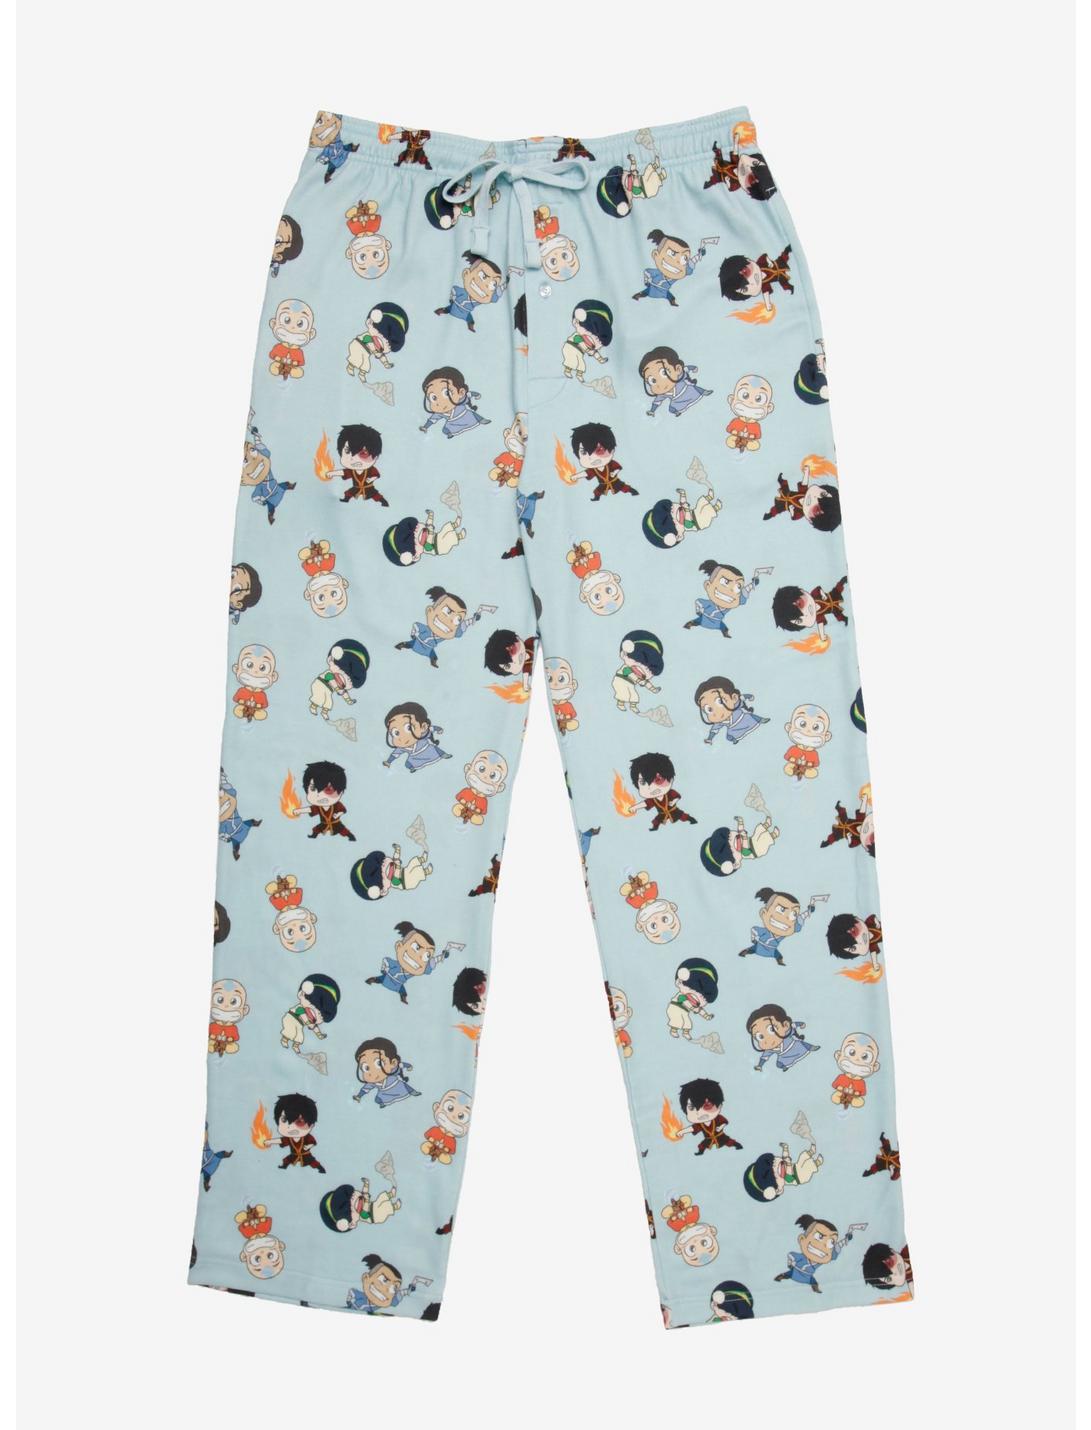 Avatar: The Last Airbender Chibi Allover Print Sleep Pants - BoxLunch Exclusive, MULTI, hi-res